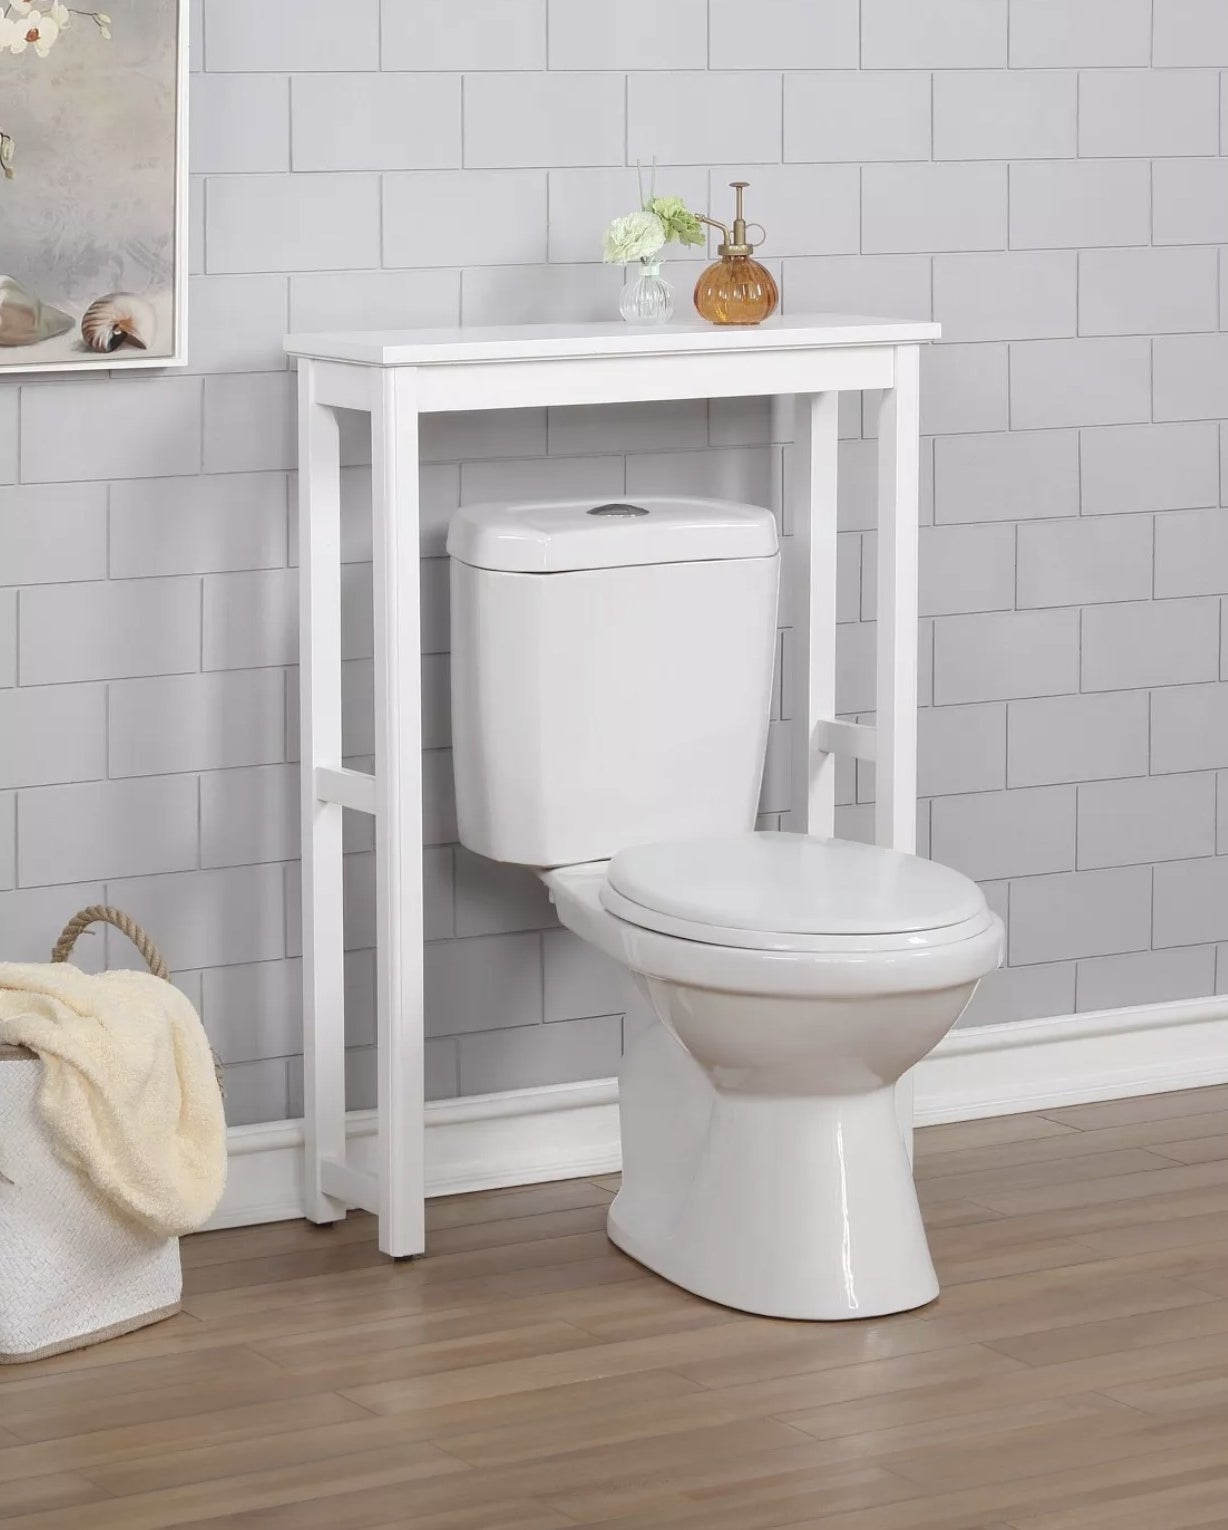 The white shelving over a toilet 